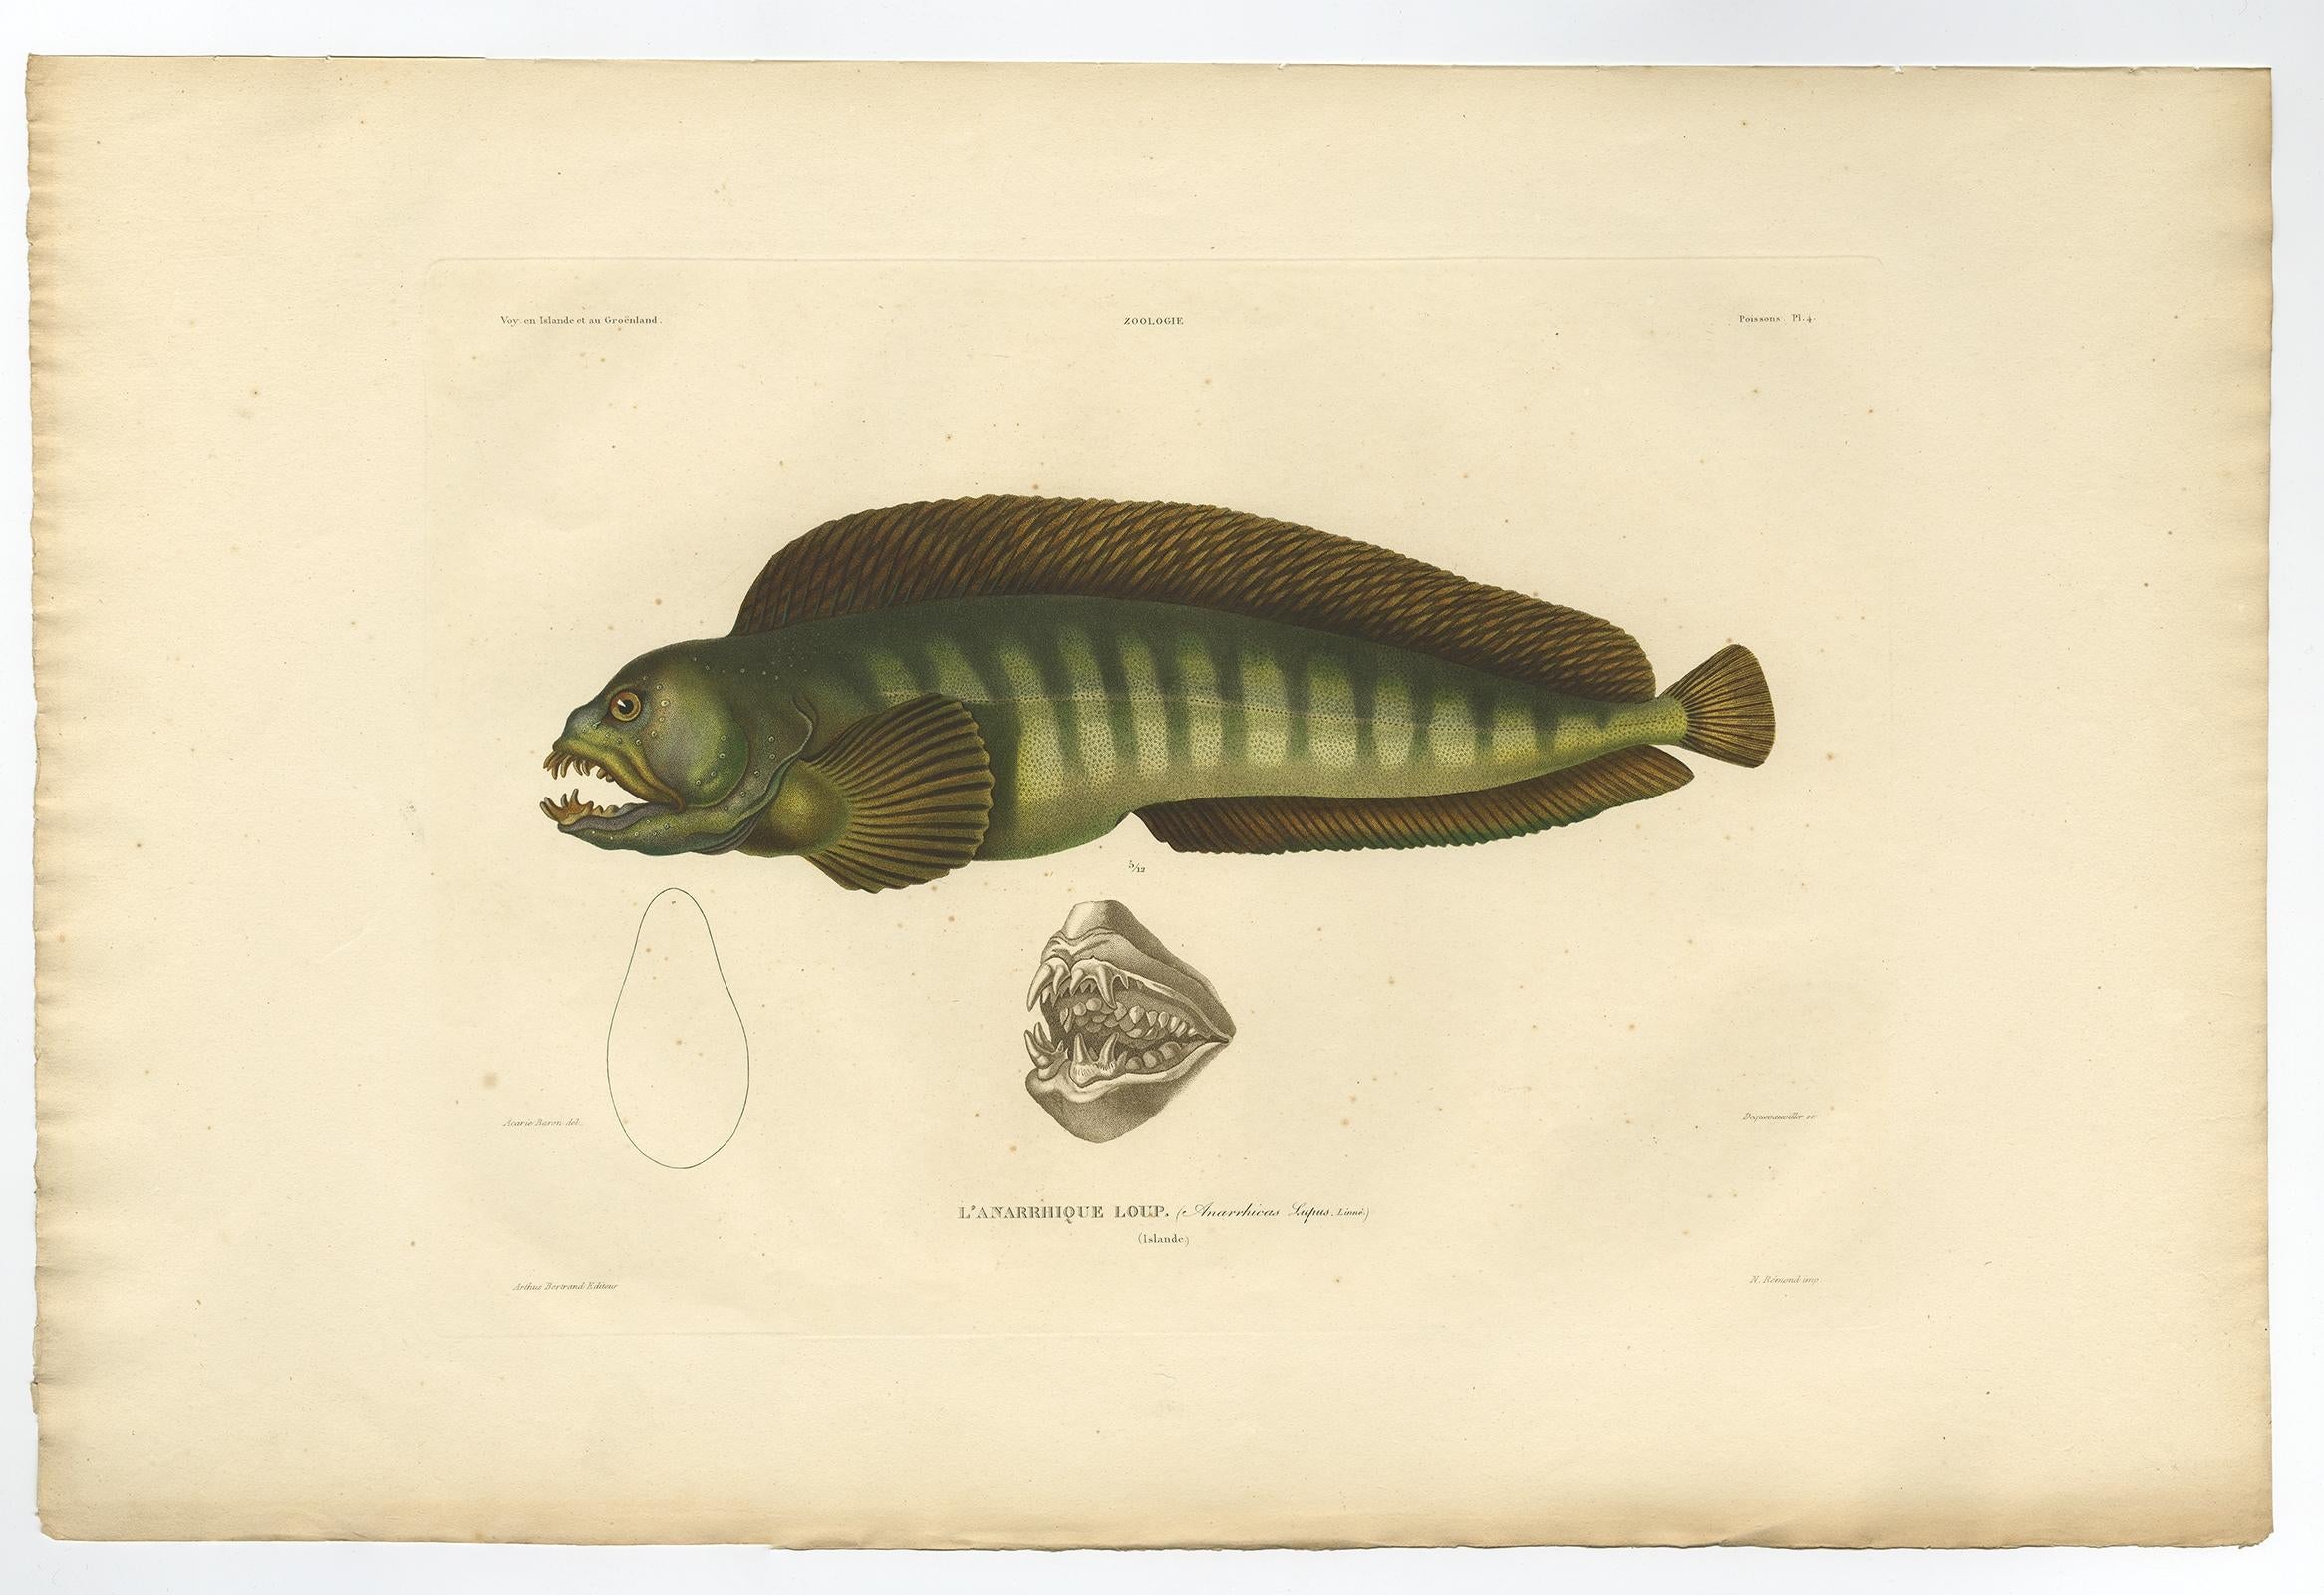 Antique print, titled: 'Poissons Plate 4 - L'Anarrhique Loup (Anarrhicus lupus).' - 

This rare plate shows the Atlantic wolffish (Anarhichas lupus), also known as the seawolf, Atlantic catfish, ocean catfish, cat wolf fish, devil fish, wolf eel